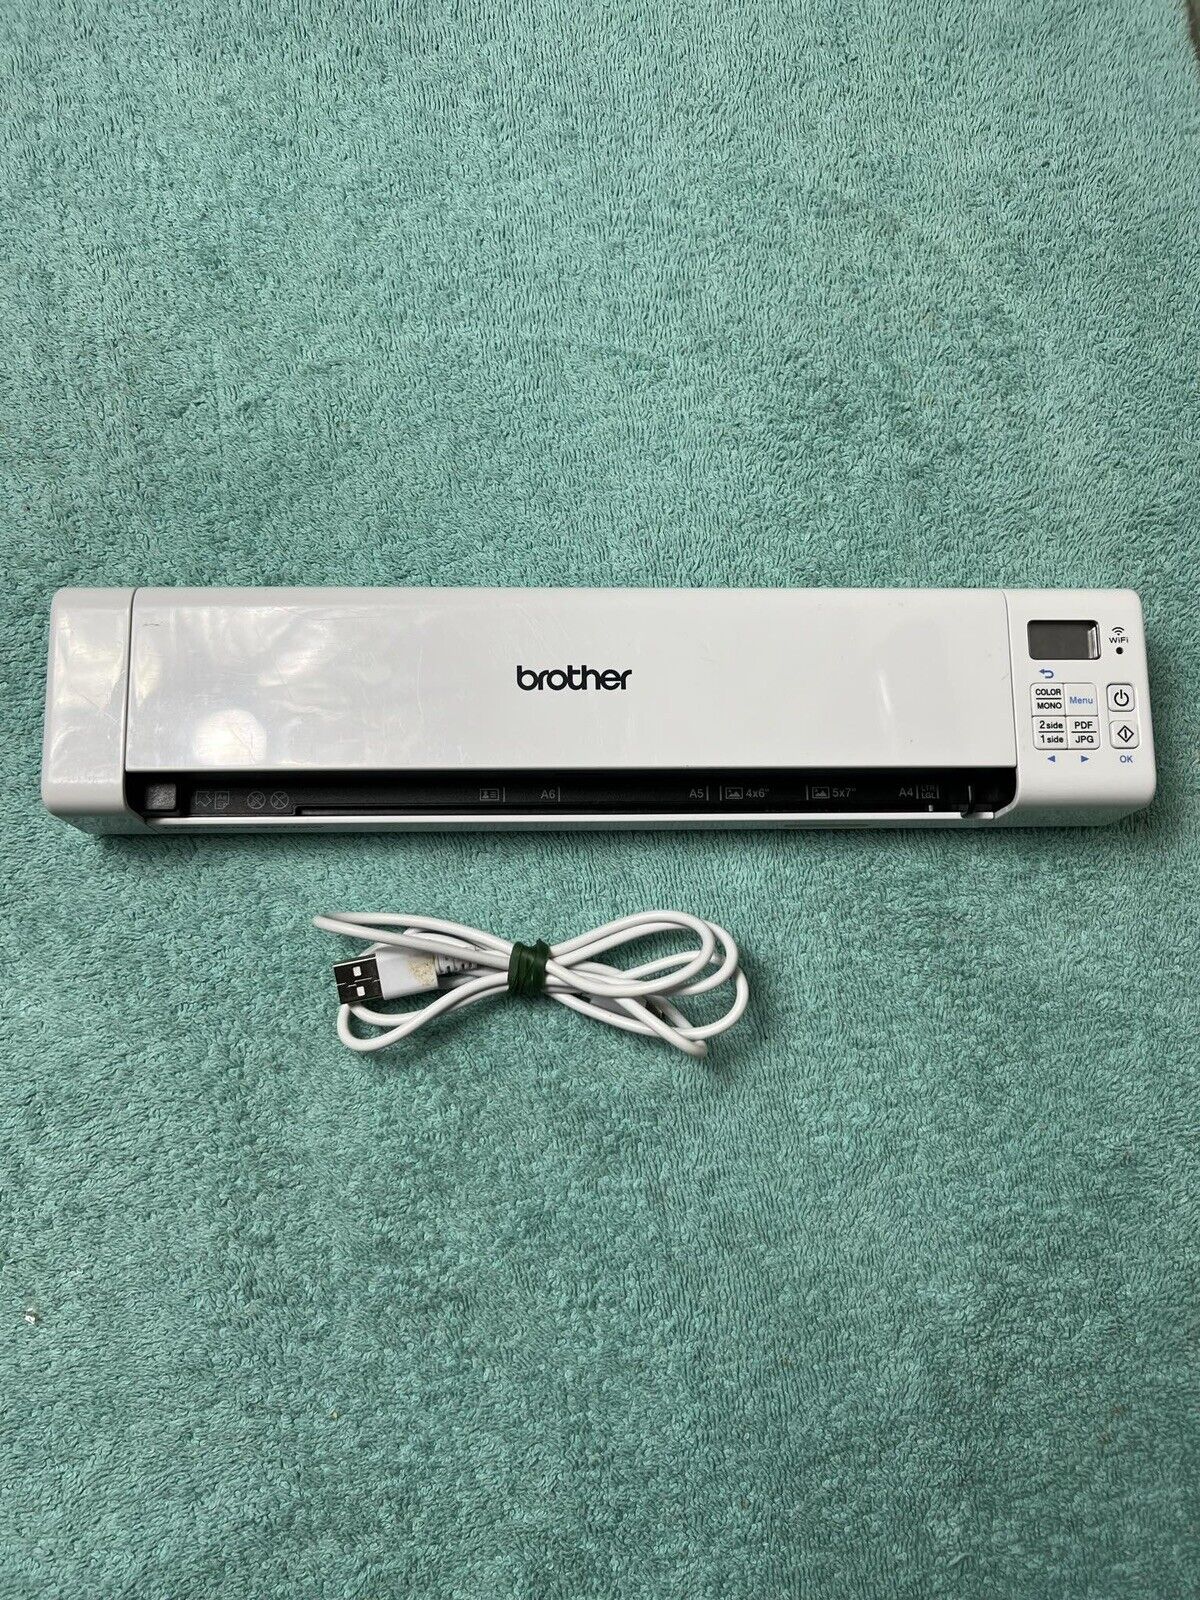 Brother DS-920DW Portable Scanner